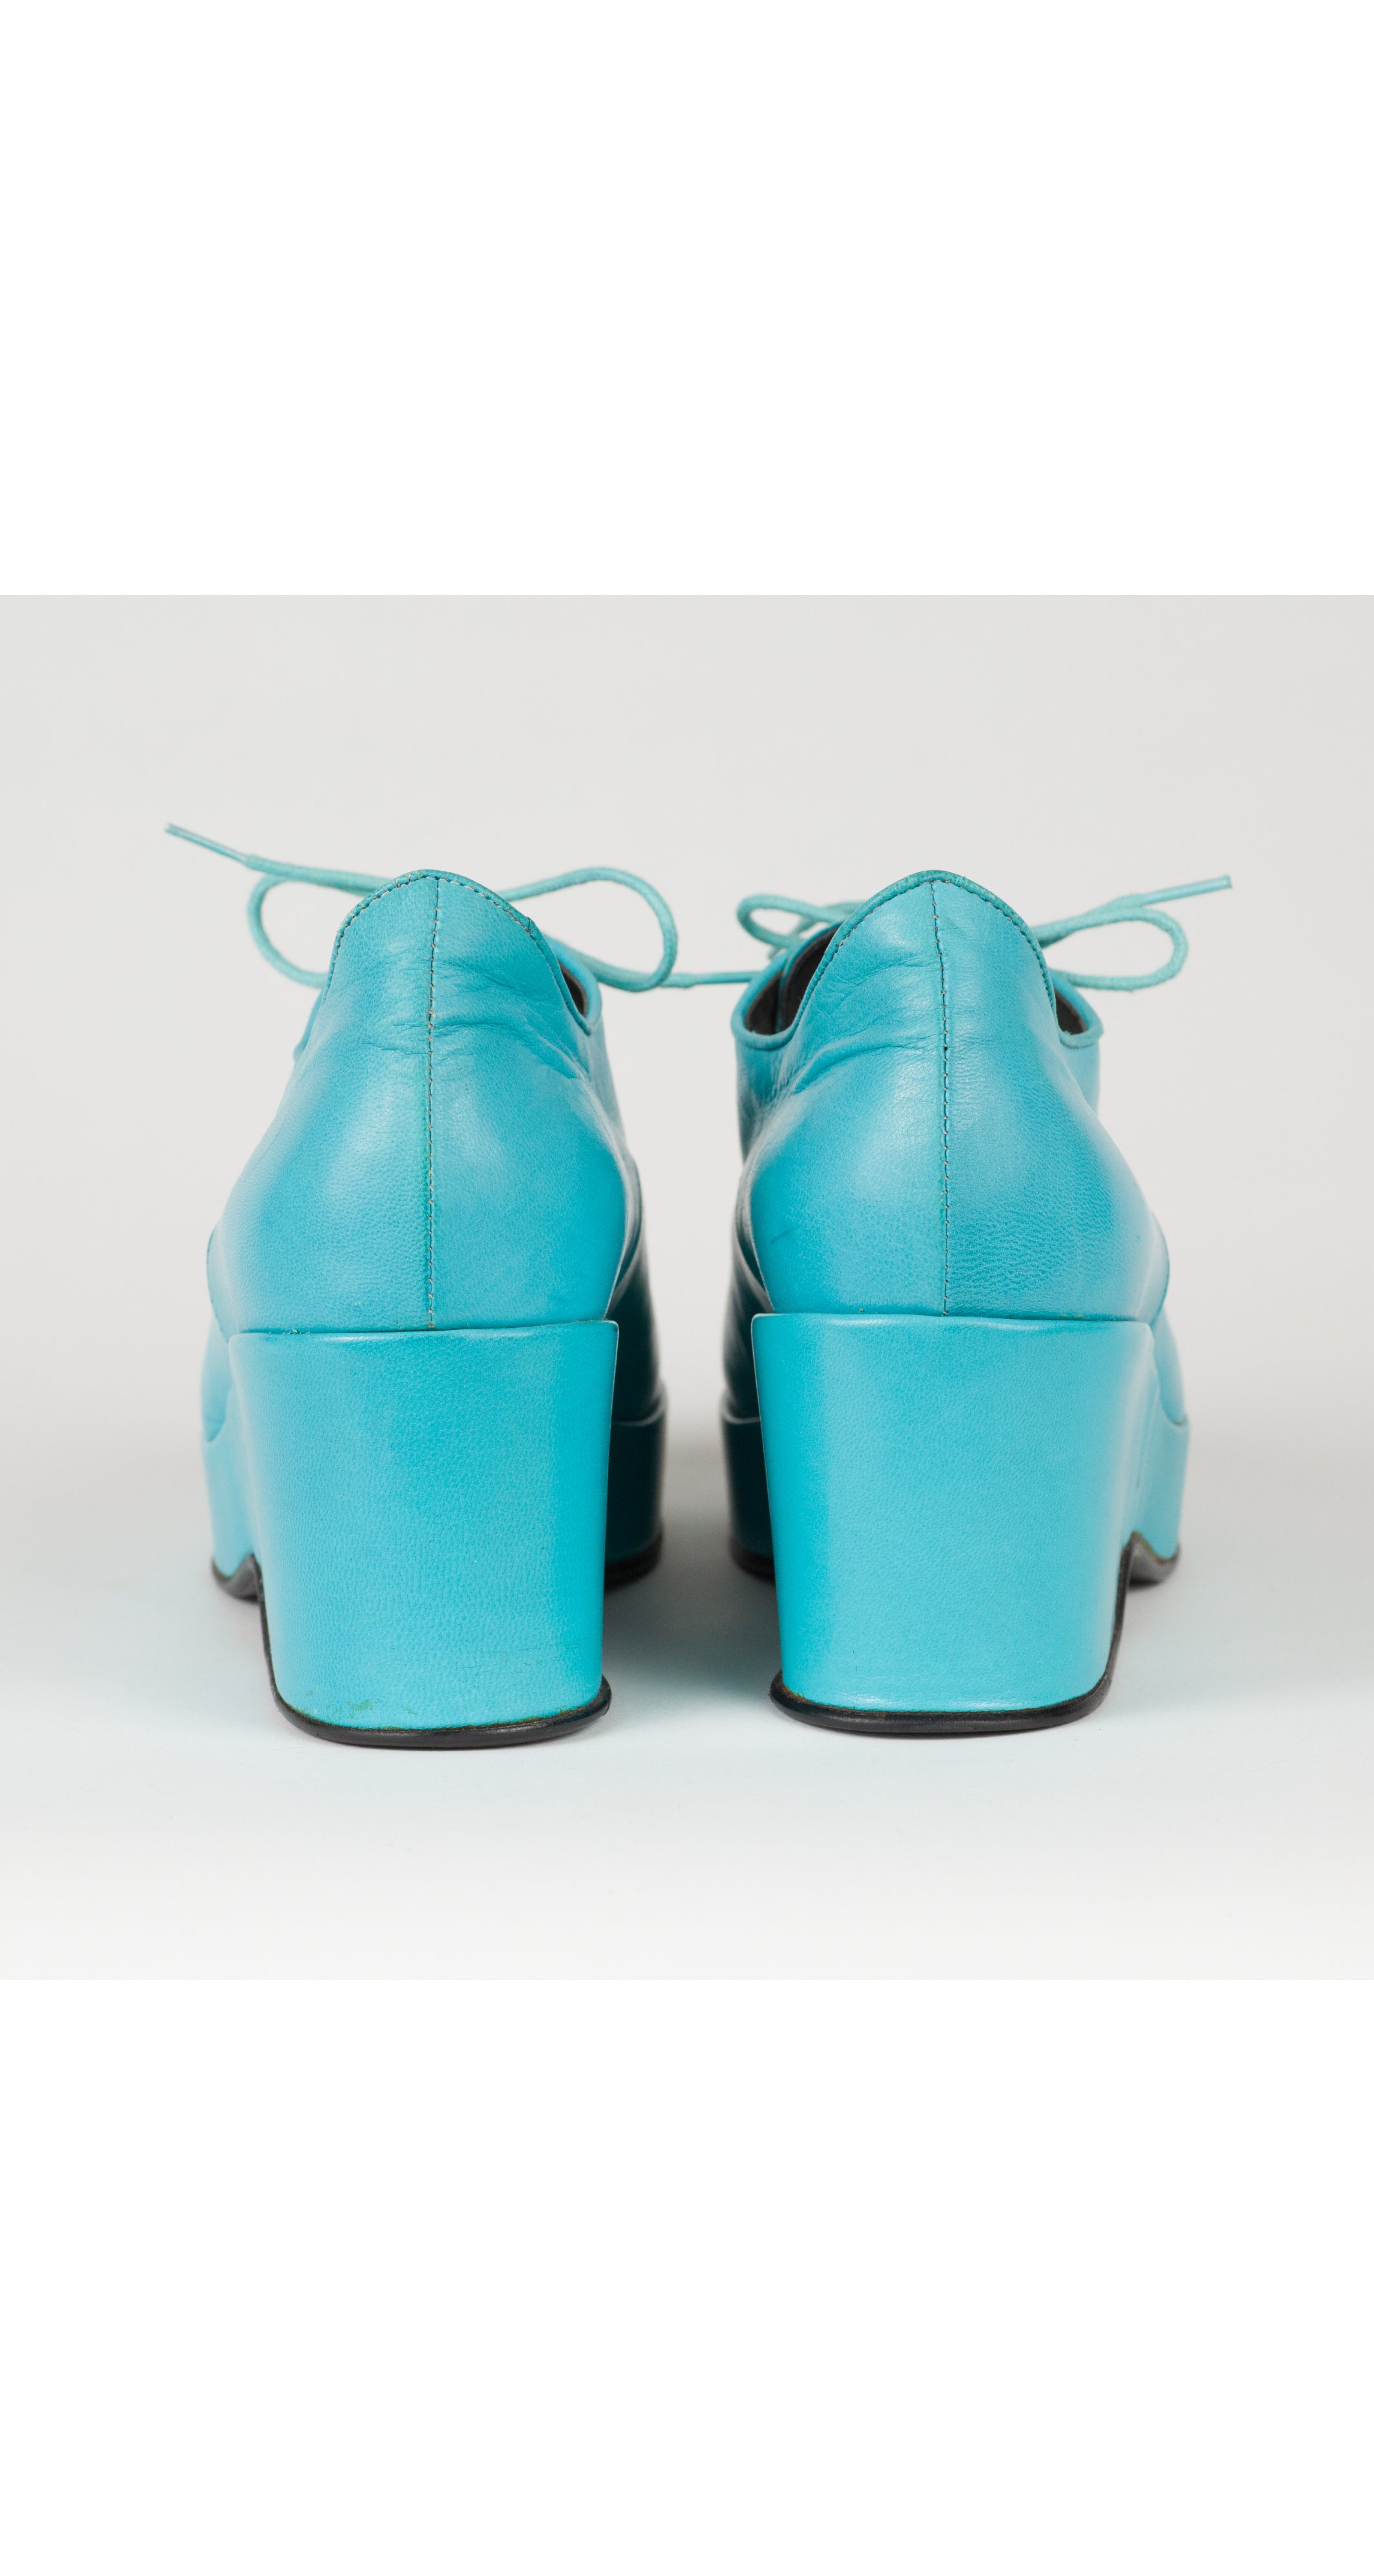 Turquoise Leather Lace-Up Platform Shoes